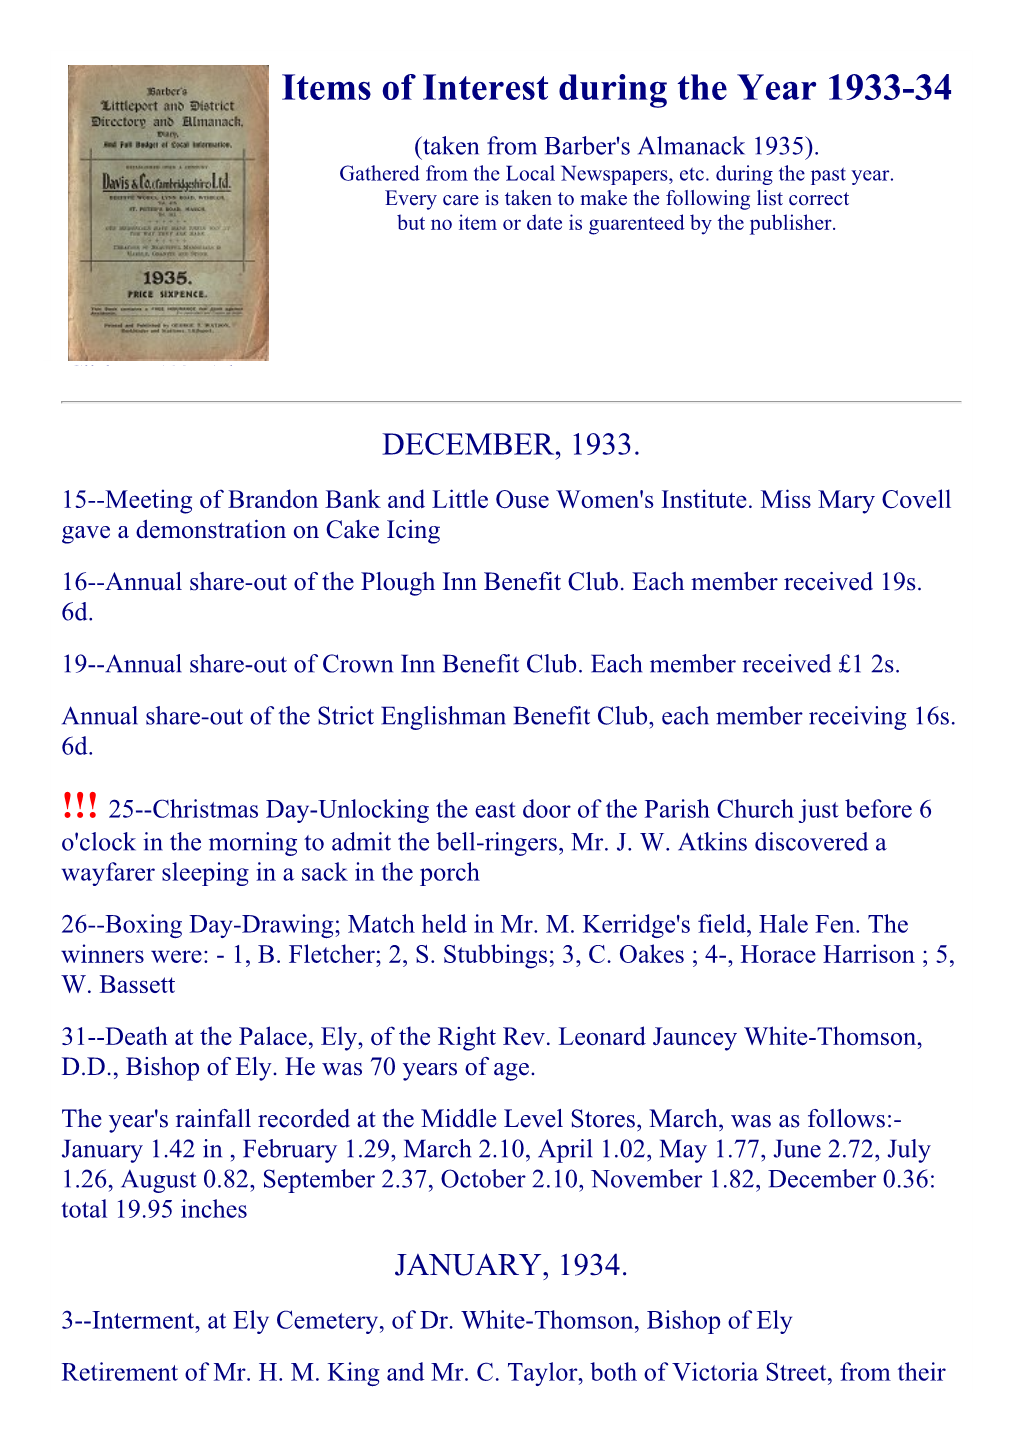 Items of Interest During the Year 193334